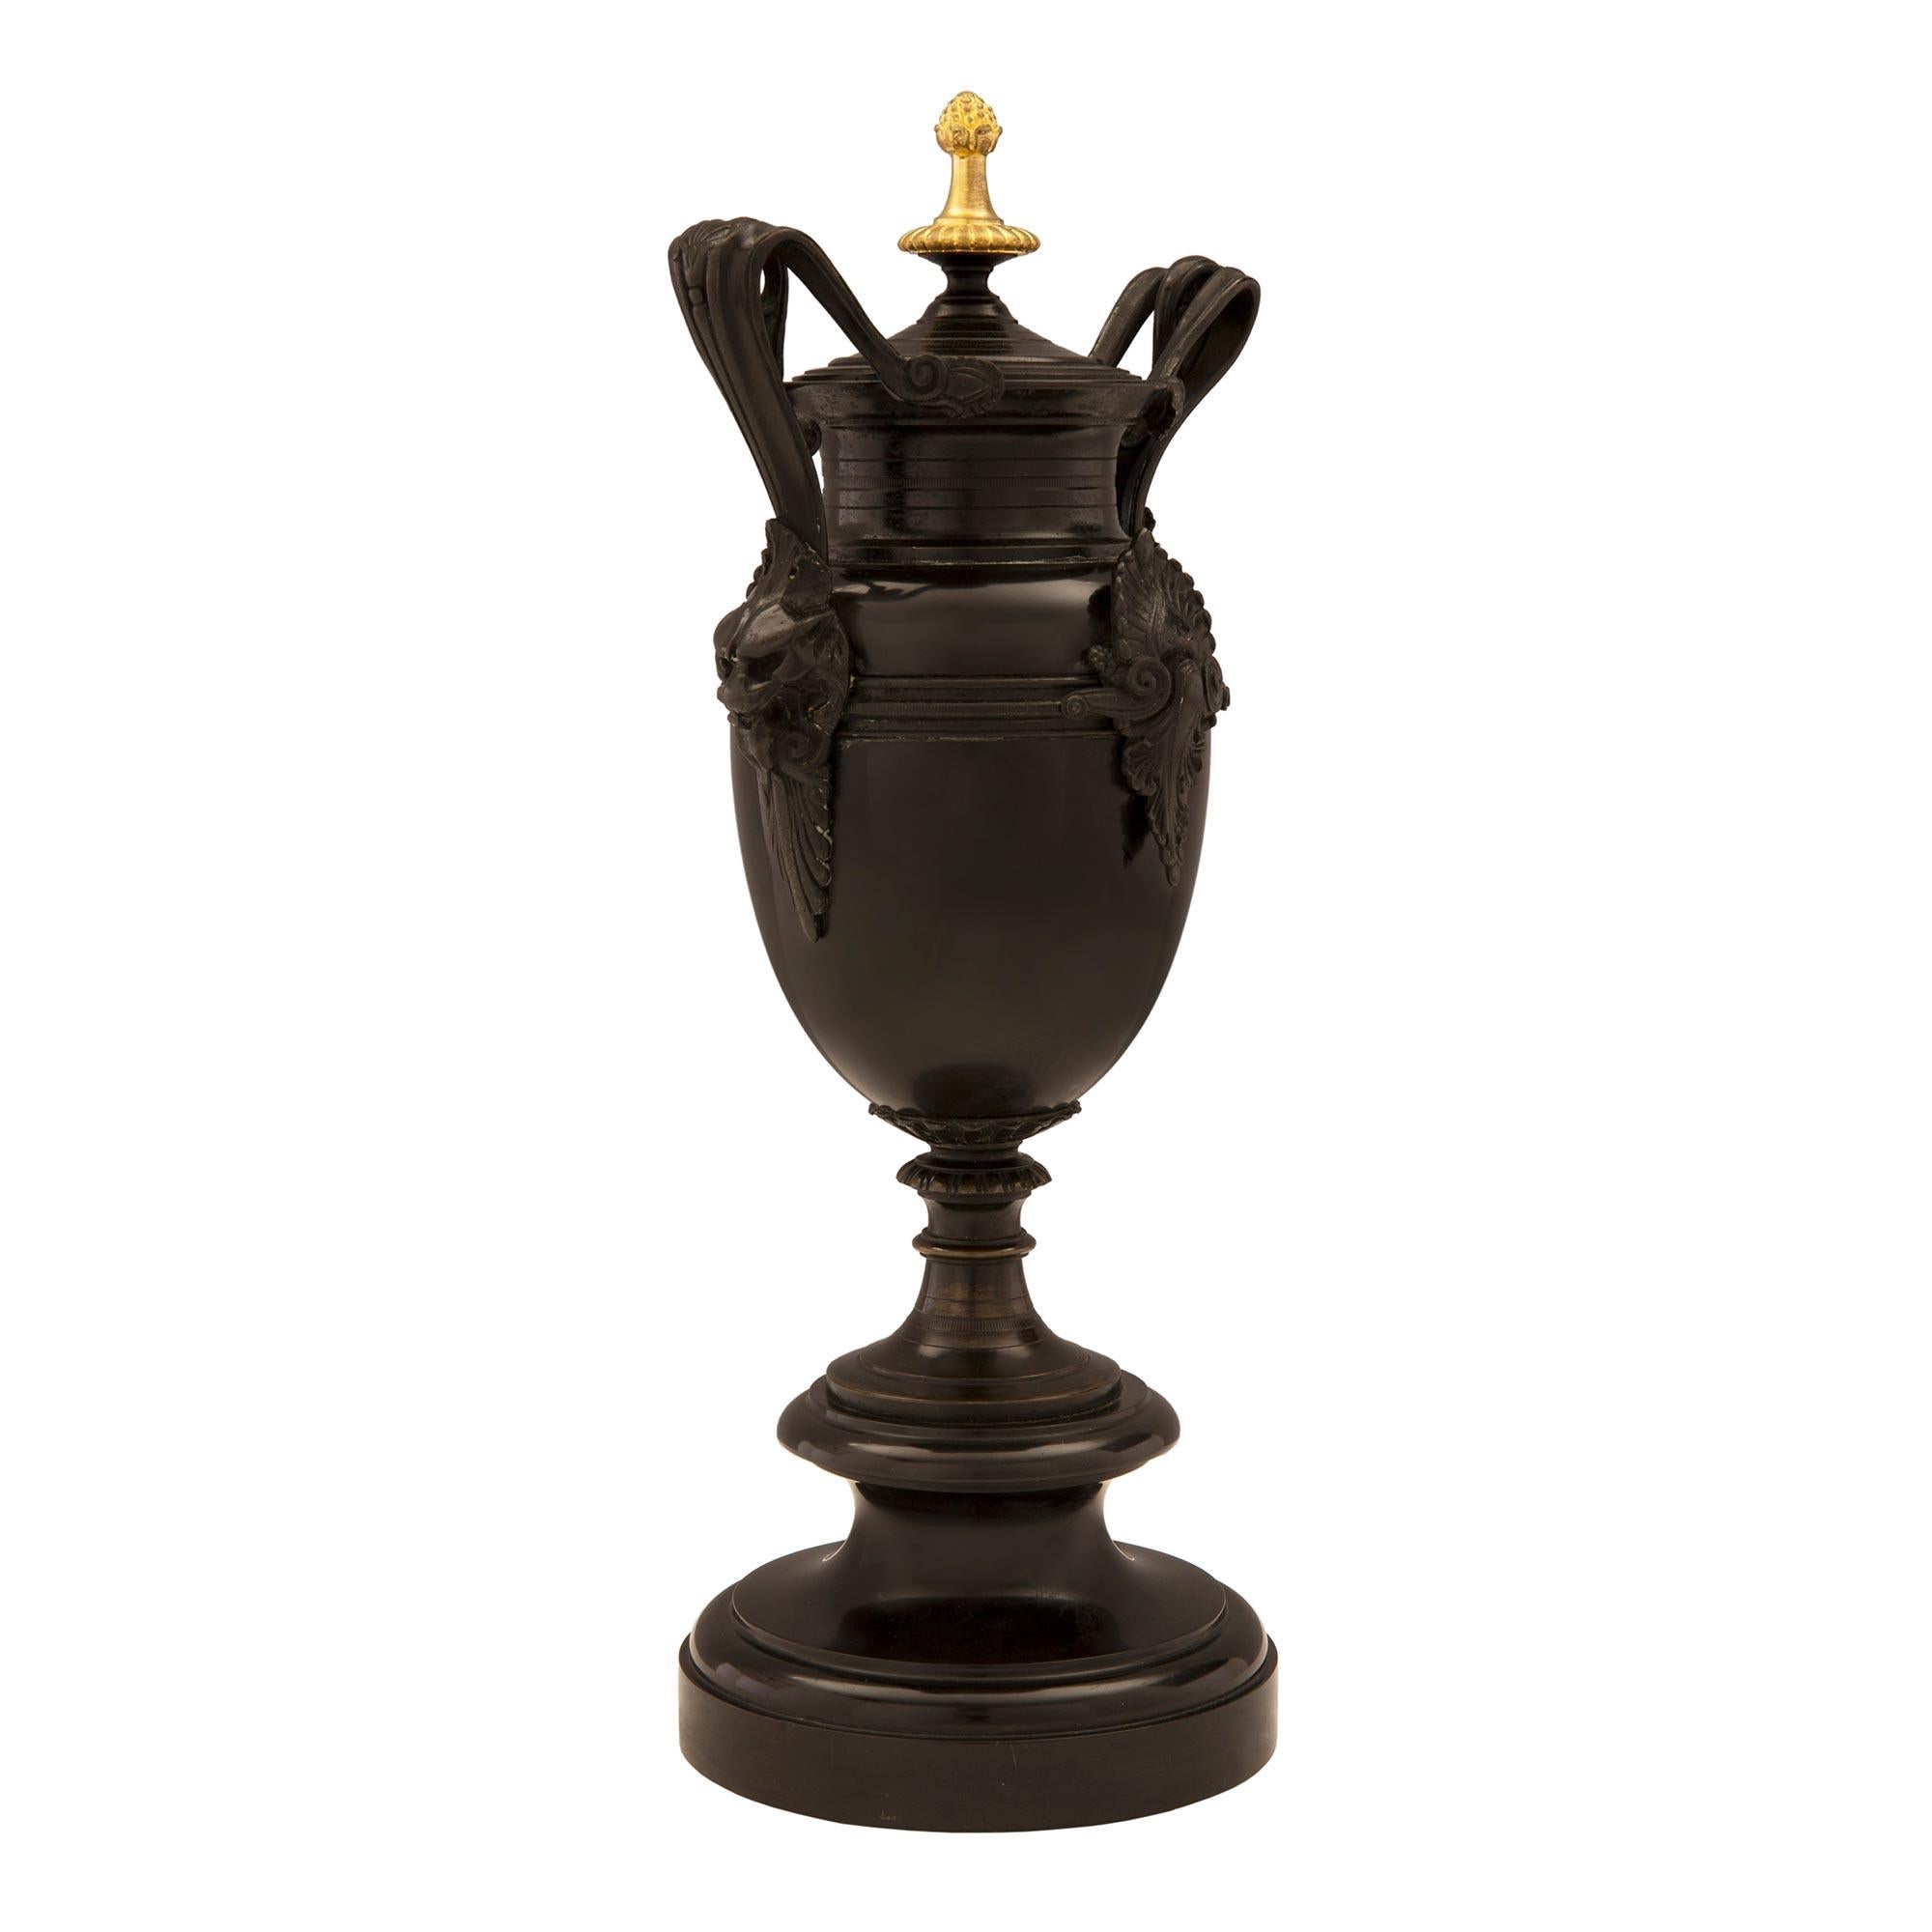 A handsome pair of French 19th century Renaissance st. patinated bronze and ormolu urns. Each urn is raised by a circular base with a mottled border below the socle shaped support. The body displays an impressive central palmette amidst scrolled